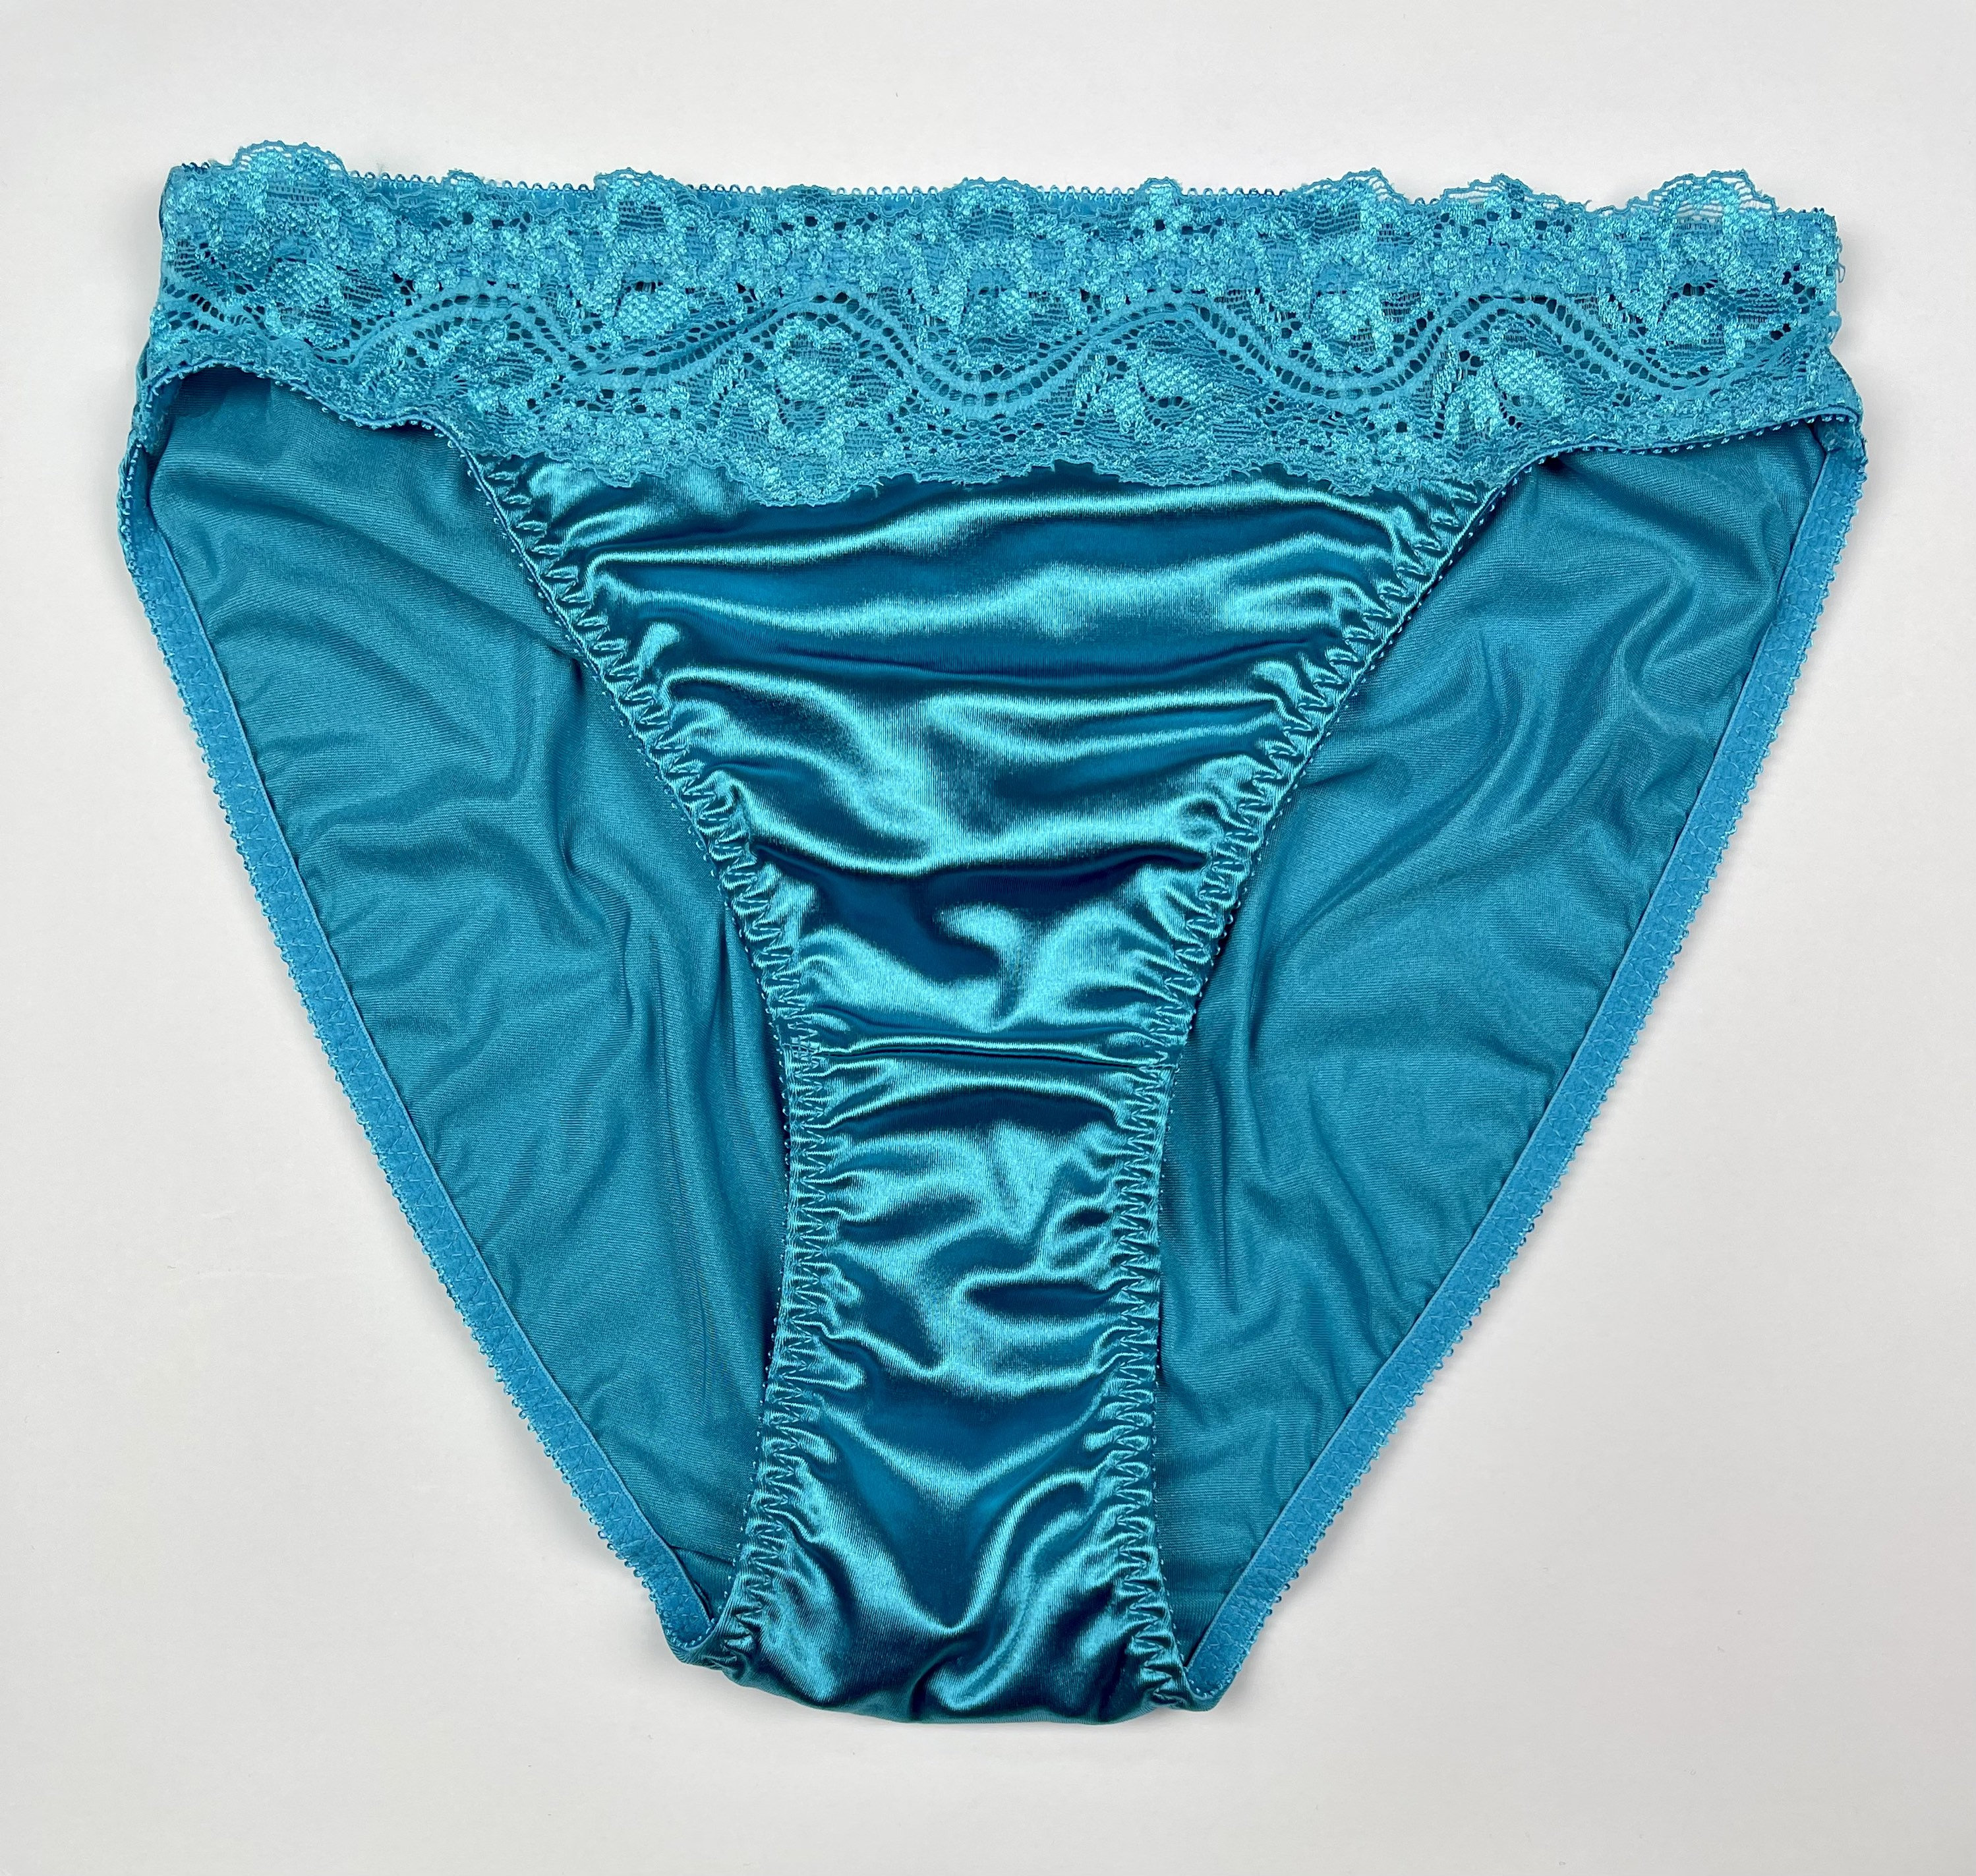 carlene conzo recommends 80s high cut panties pic